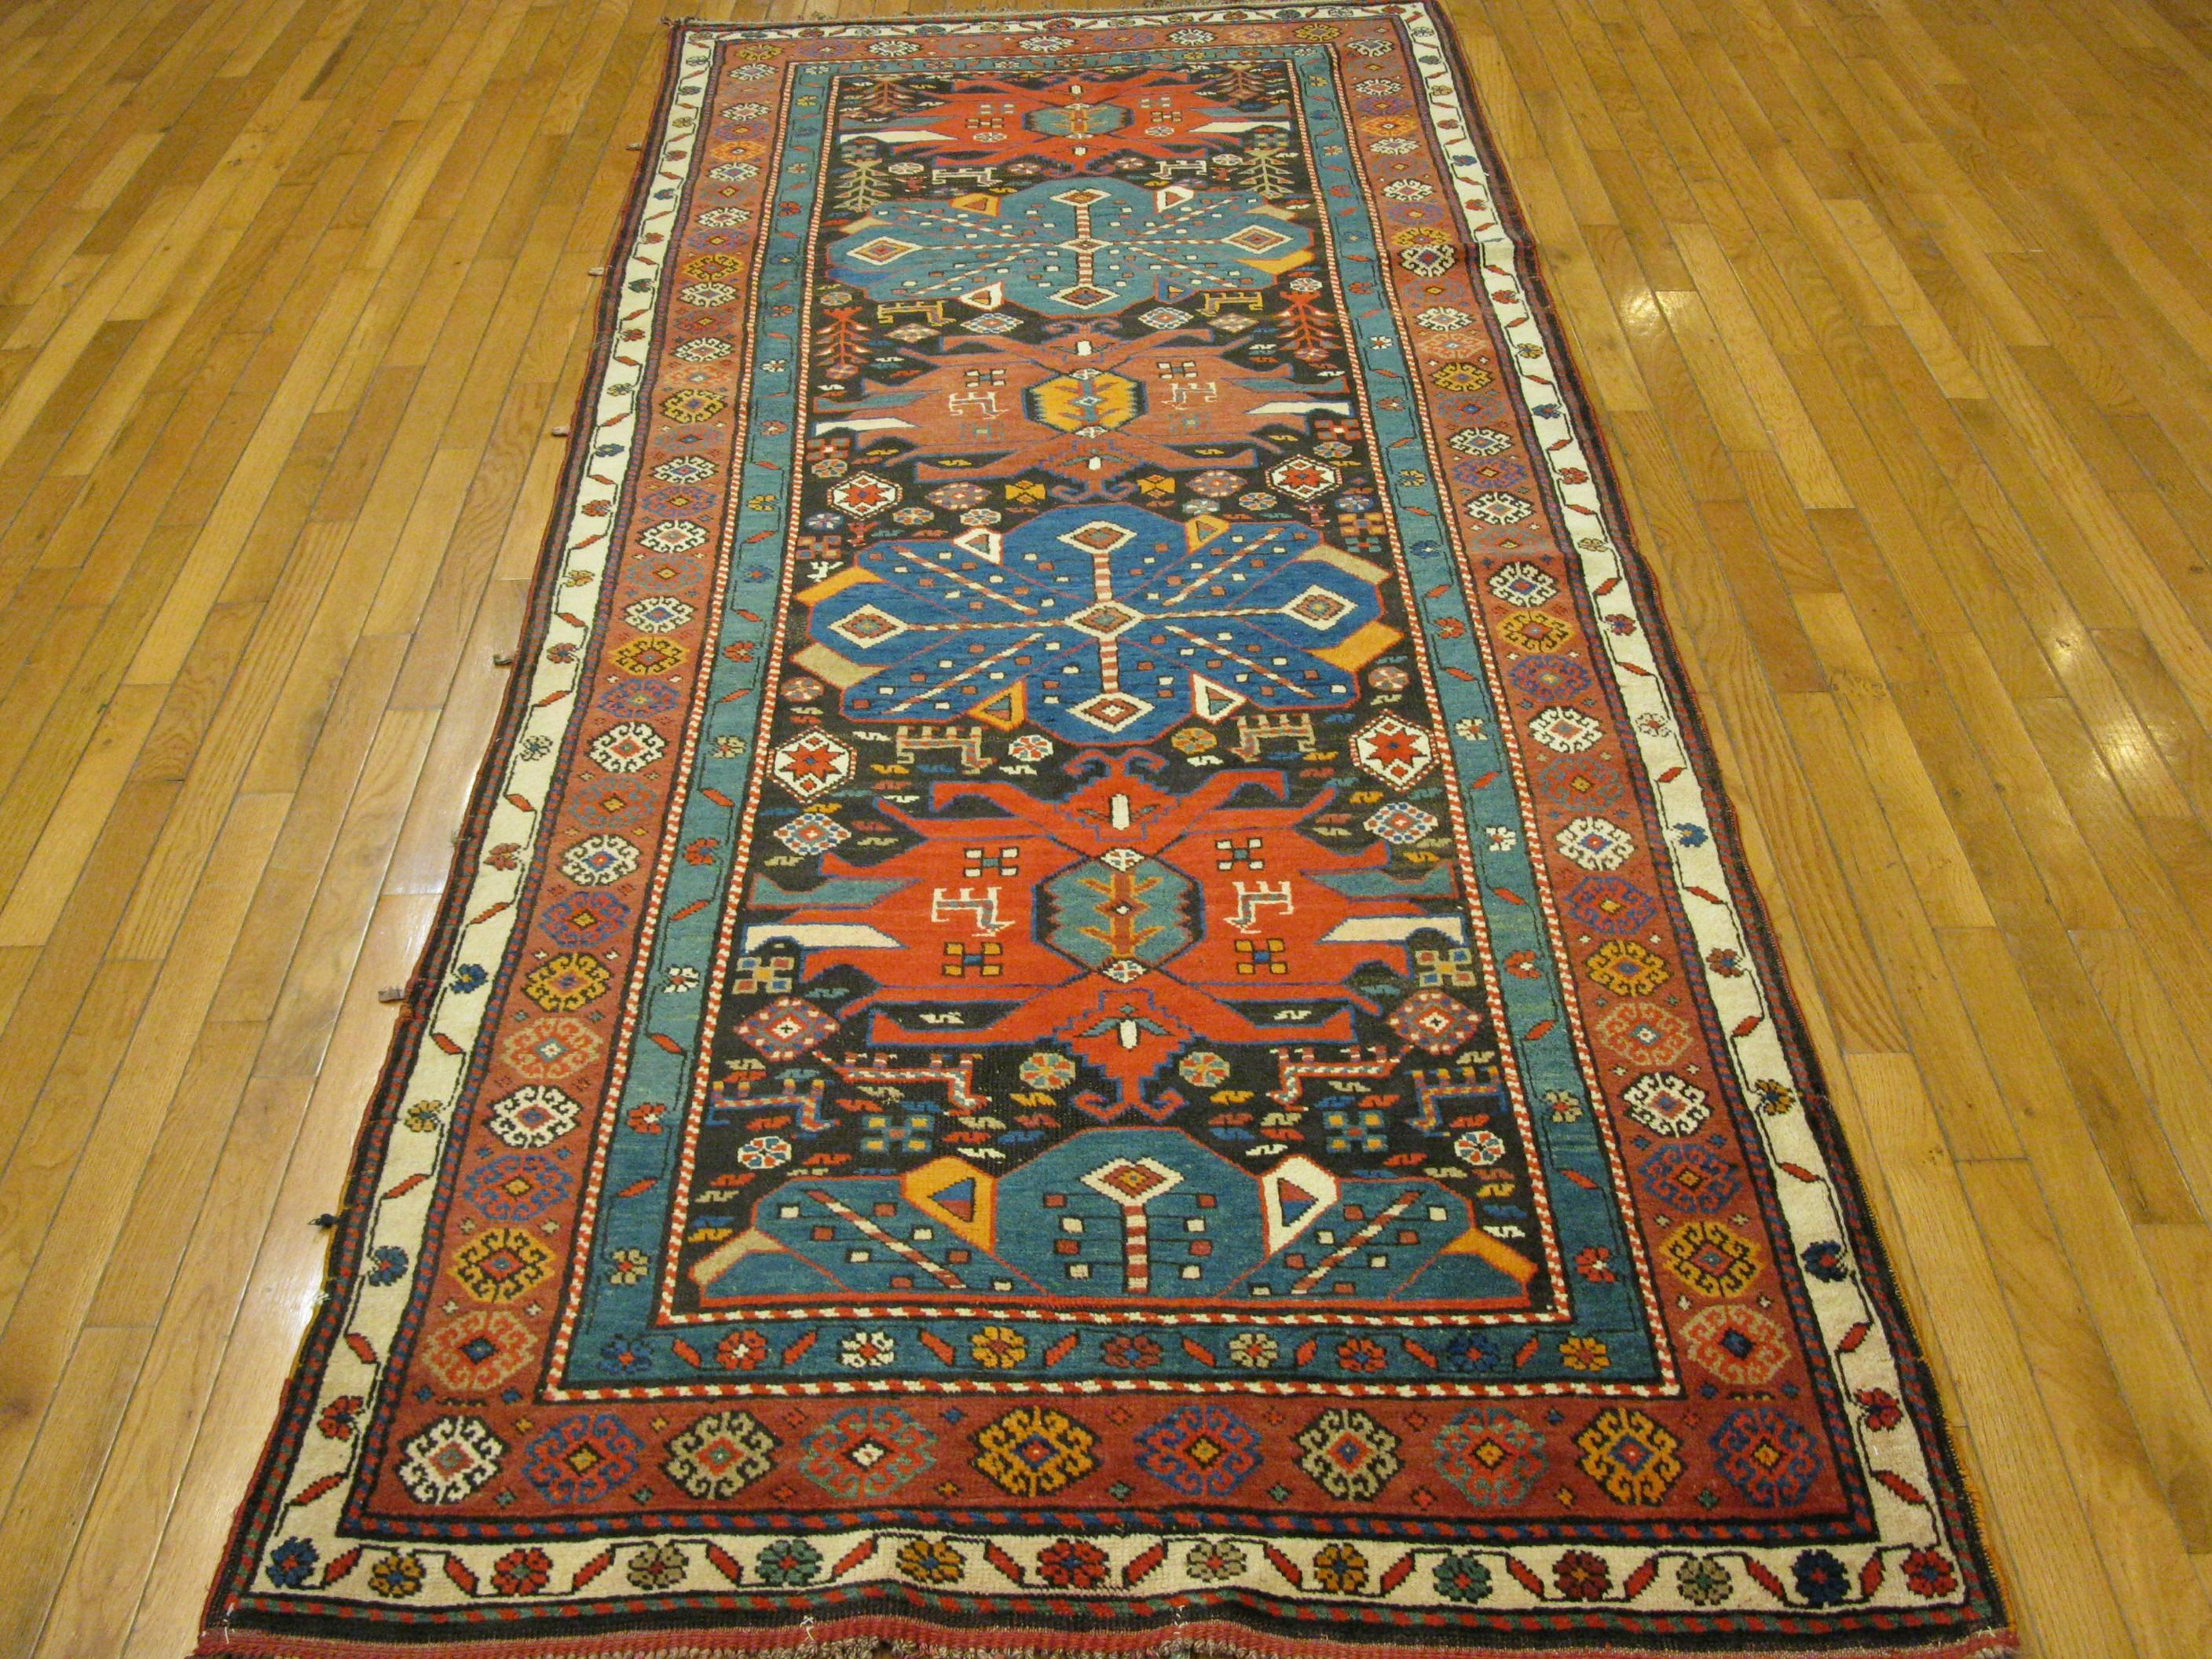 This short antique hand-knotted runner rug was made in the village of Kazak in the Caucuses with all wool and natural dyes. It measures 3' 9'' x 9' 9'' and it is in excellent condition.